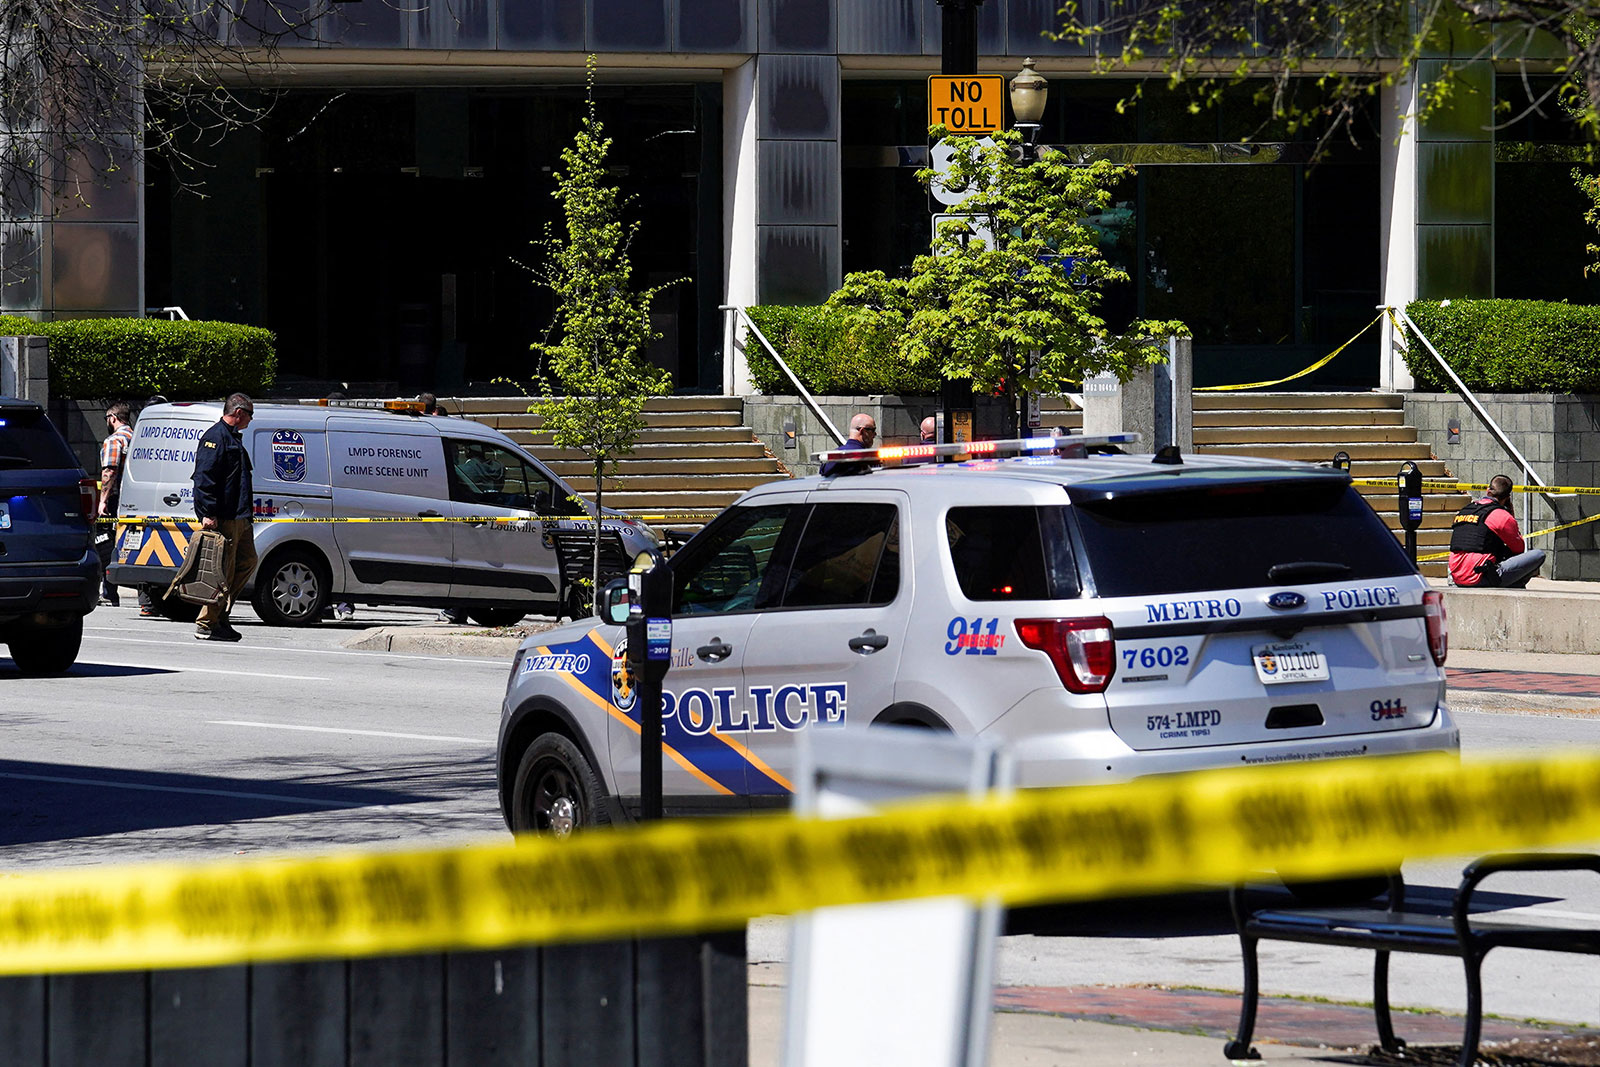 Police deploy at the scene of a shooting in downtown Louisville on Monday.